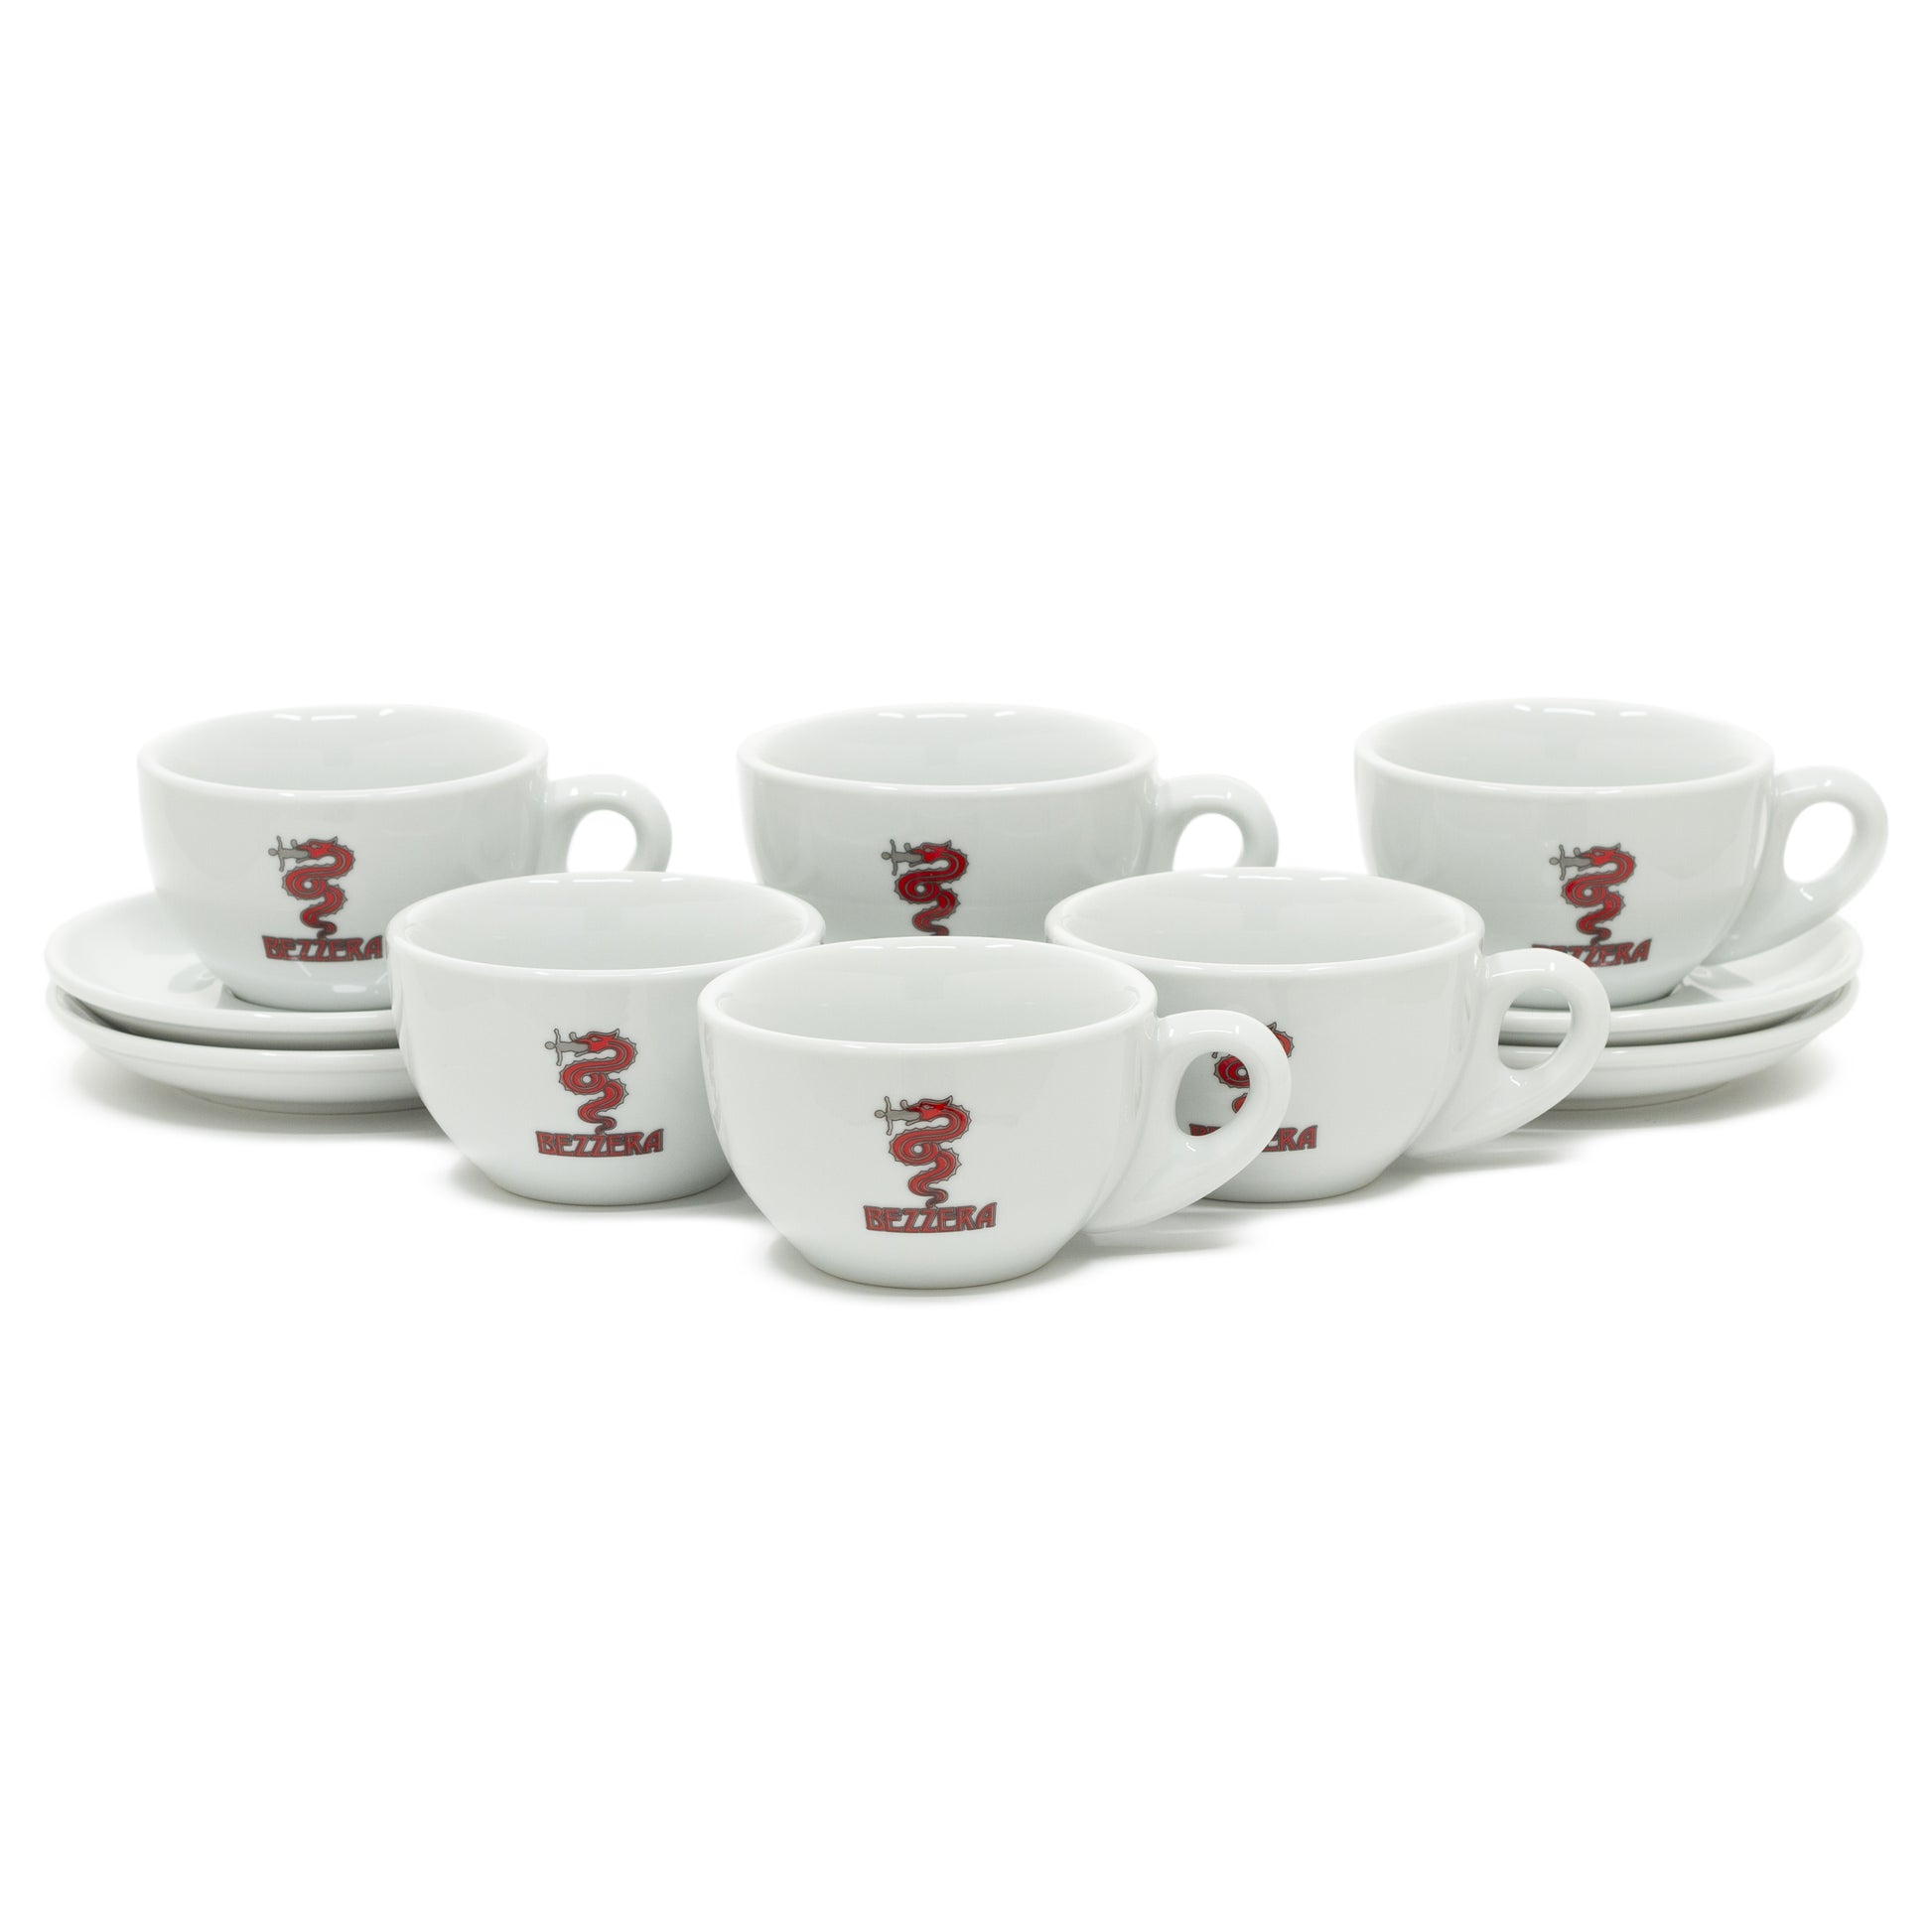 Cappuccino cups set of 4 6oz - Thick-walled stoneware cappuccino cup set  for